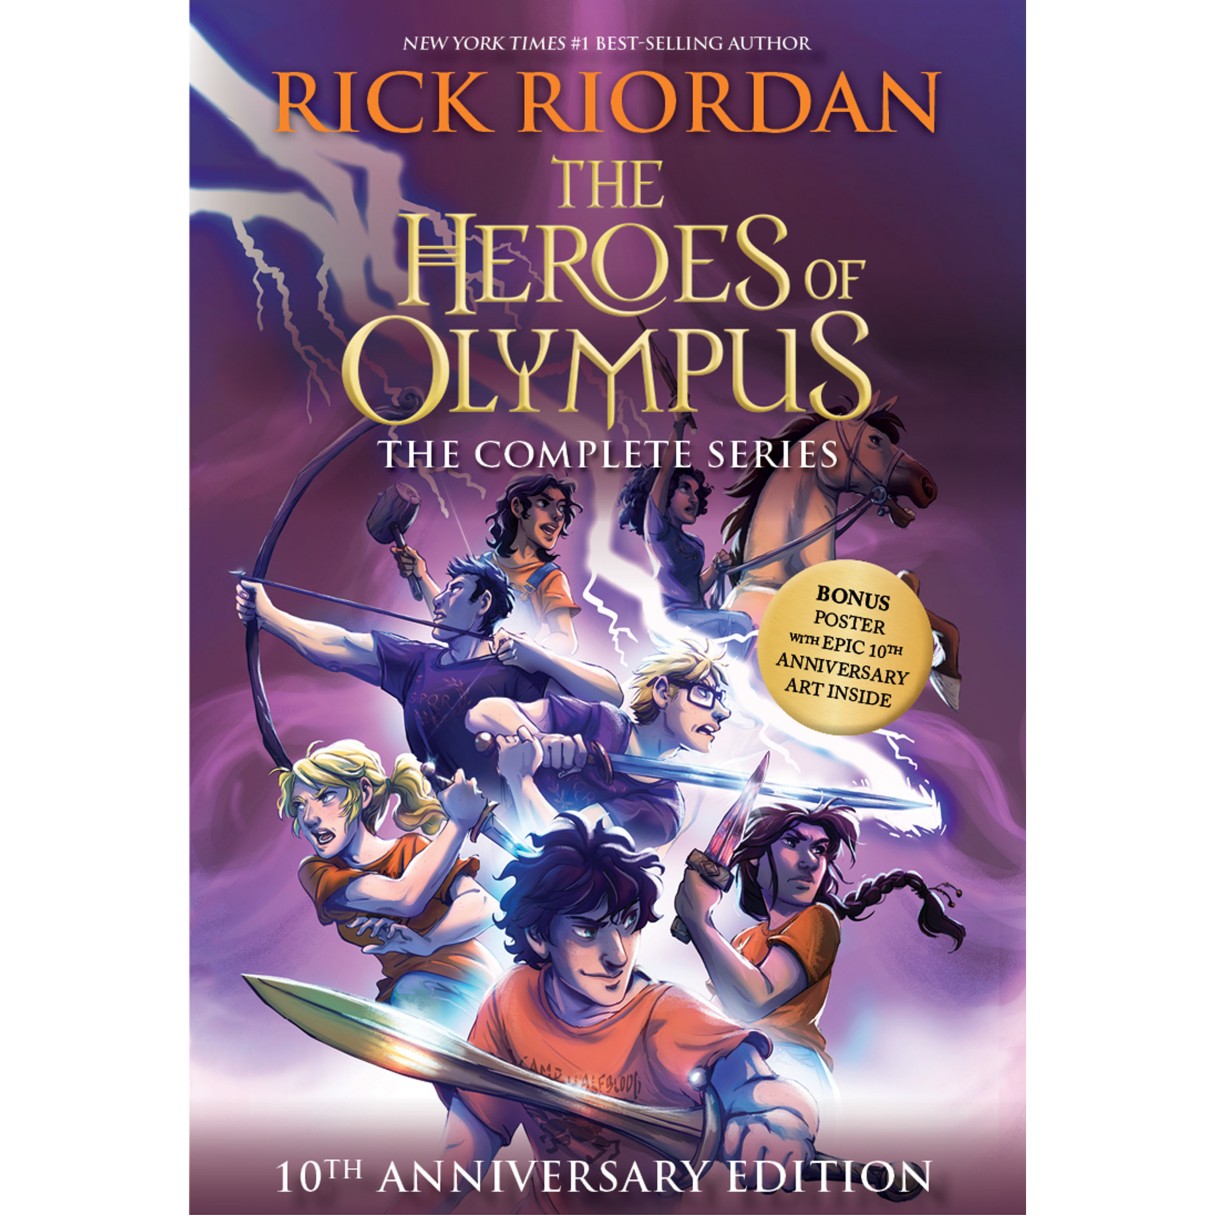 The Heroes of Olympus The Complete Series 10th Anniversary Edition